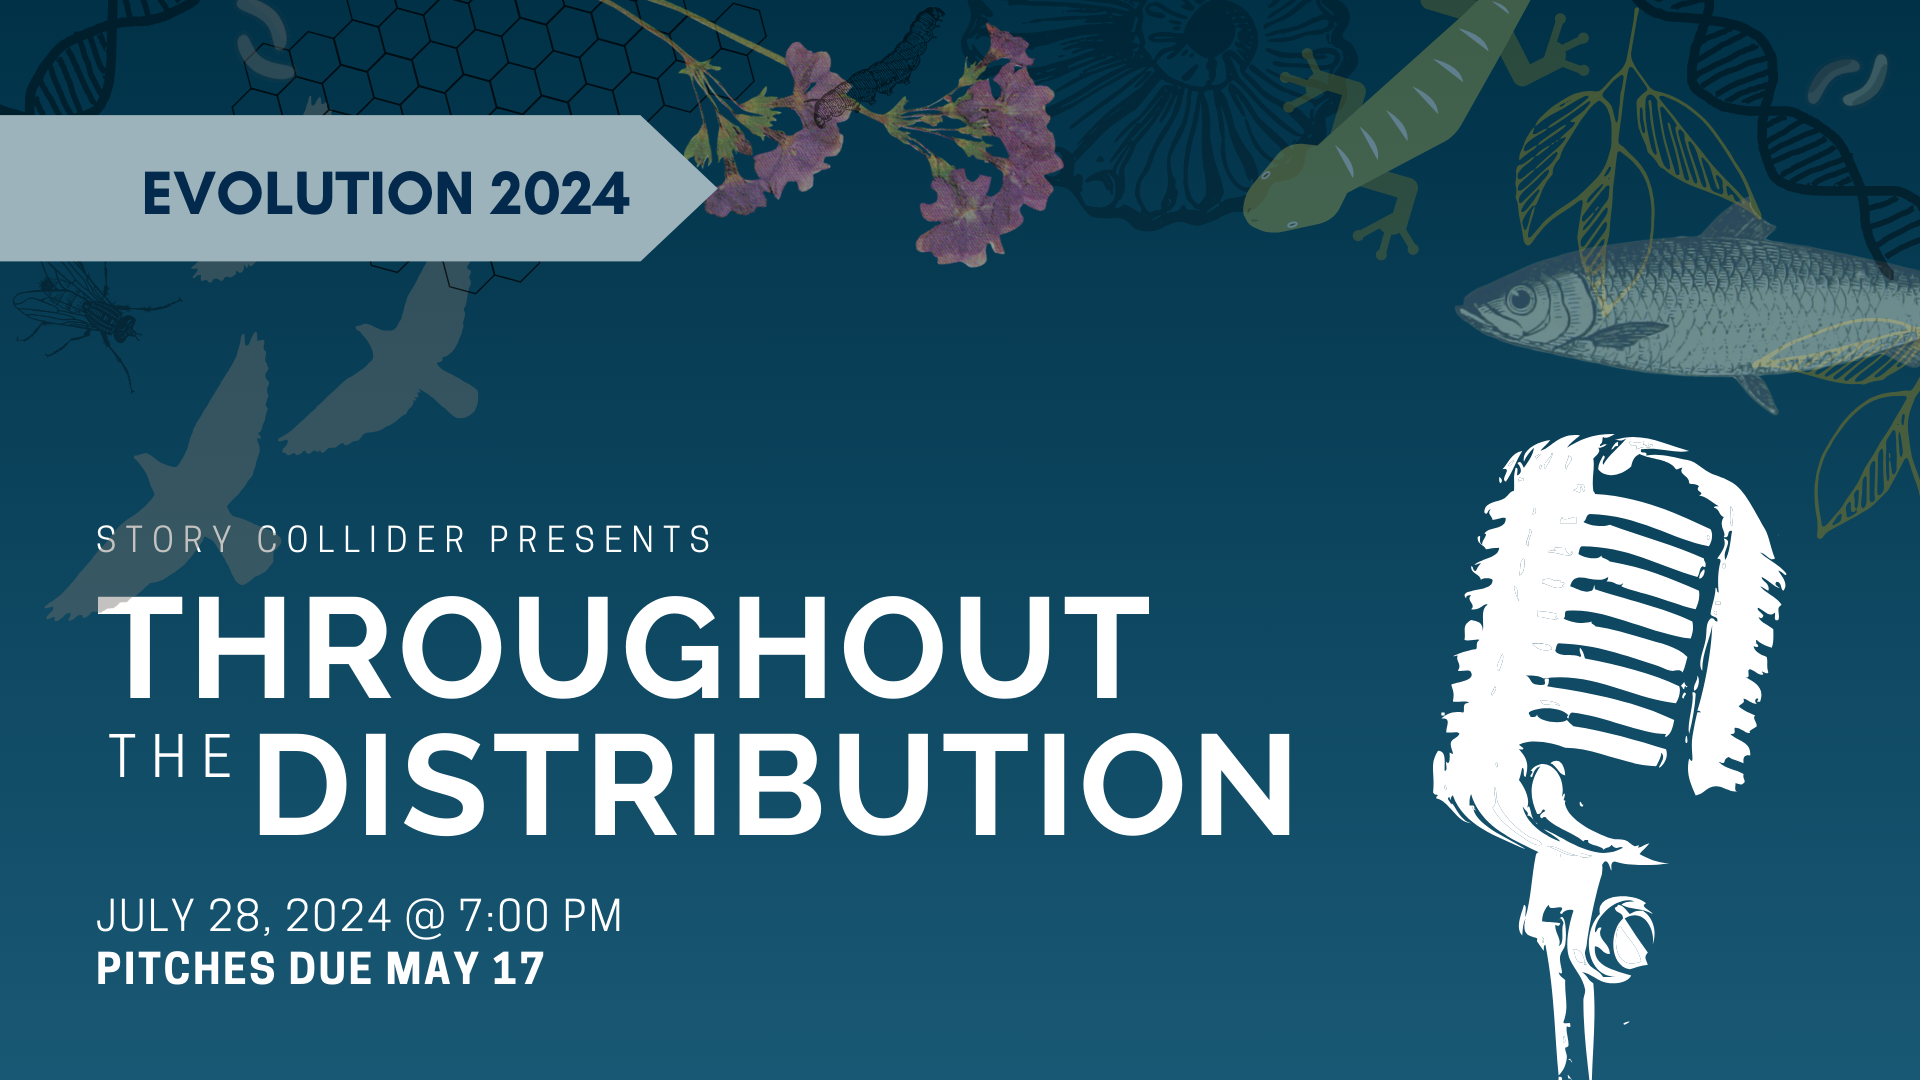 Text: Evolution 2024, Story Collider Presents Throughout the Distribution, July 27, 2024 @ 7:00 PM, Pitches due May 17. An array of cartoon organisms and DNA. An old fashioned microphone.